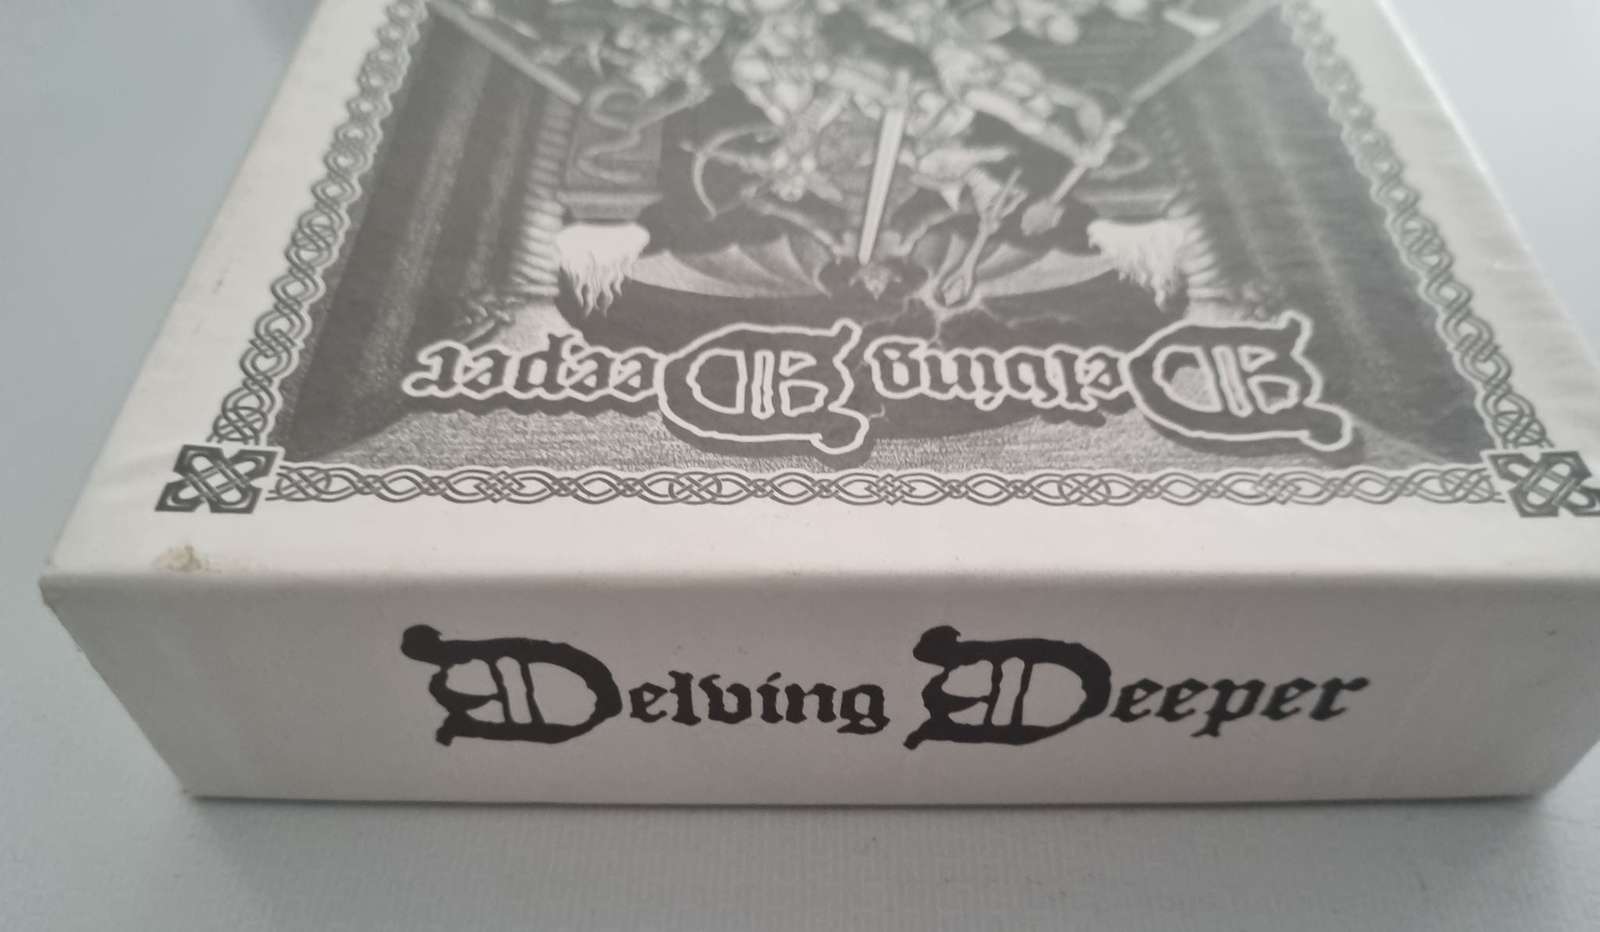 Delving Deeper - Roleplaying Box Set Default Title